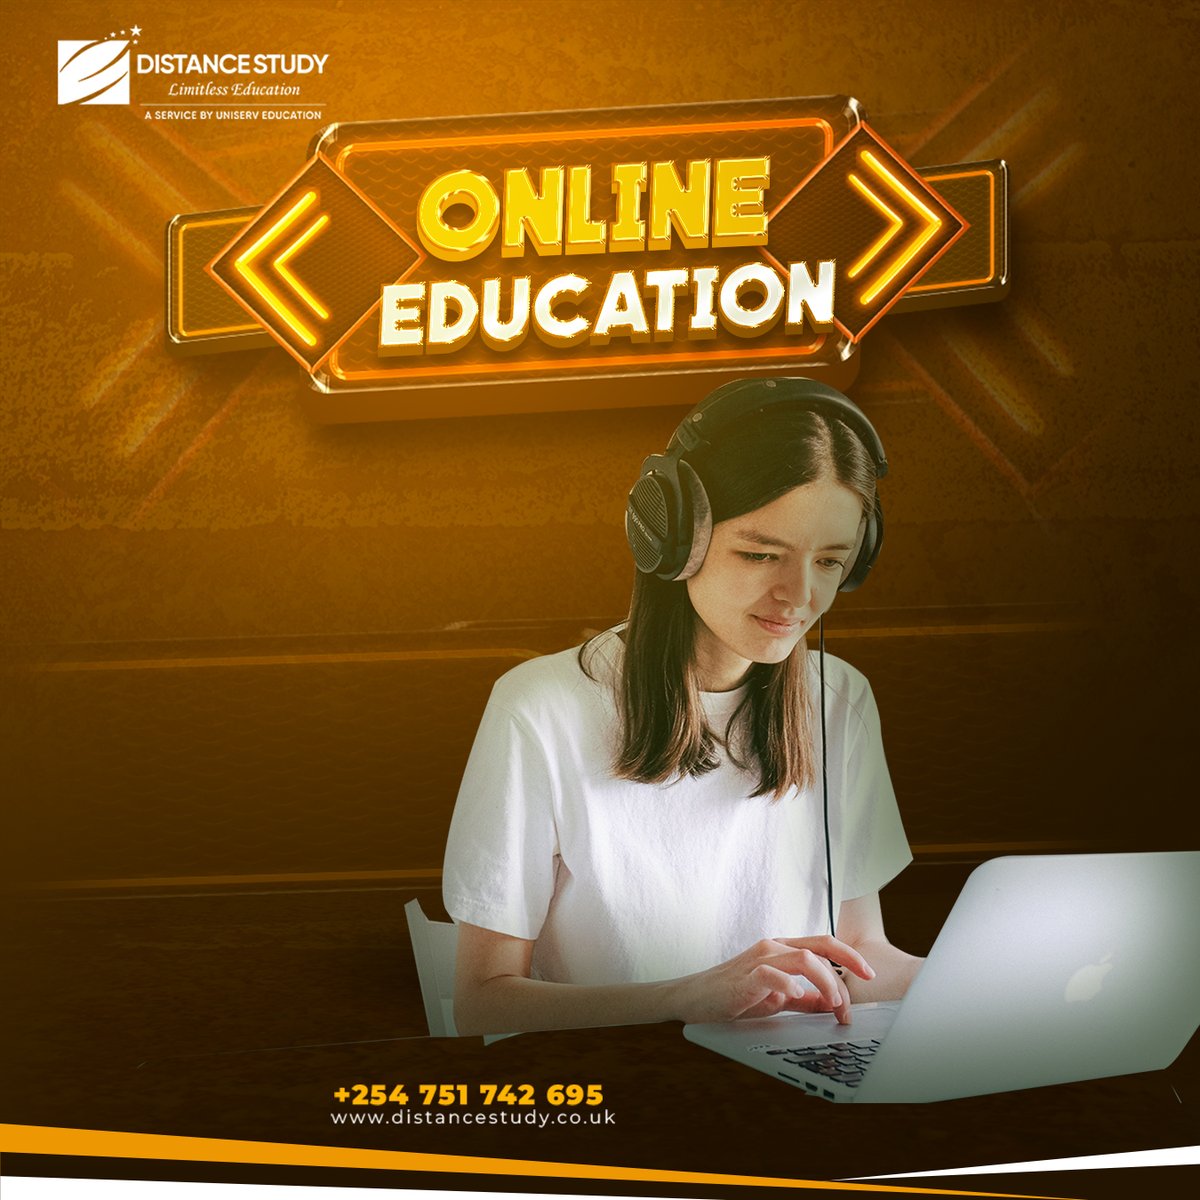 Enroll for an Online course from the best universities across the globe with us. Reach out to us through bit.ly/43zEnLO or +254 751 742 695 to apply.

#onlinelearning #uniserv #studyfromhome #educationforall #academics